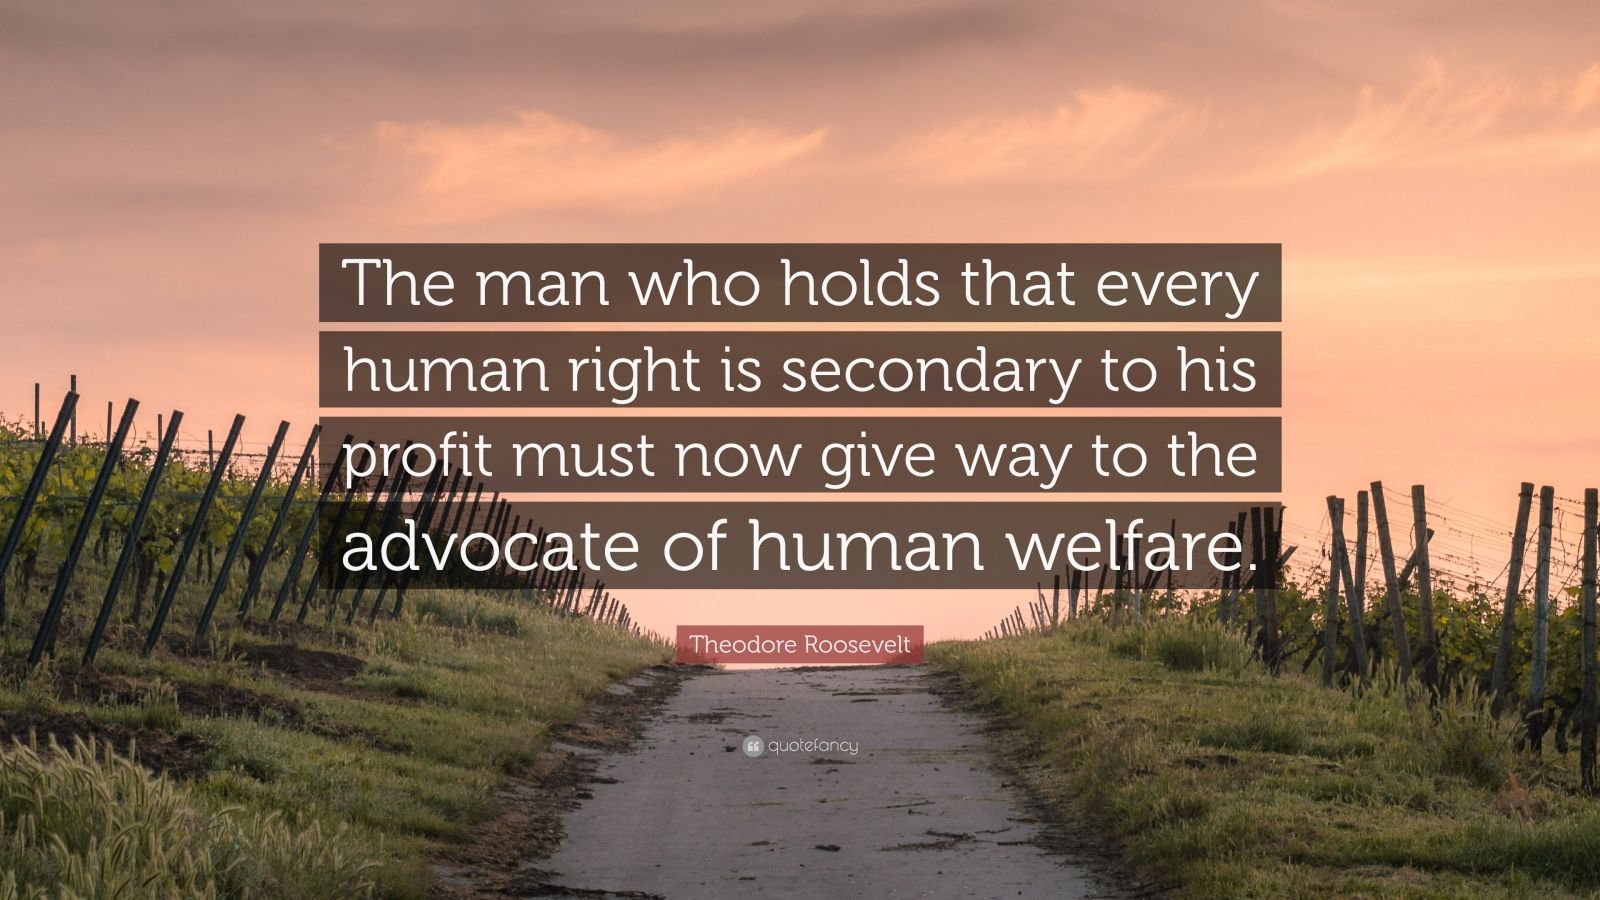 Theodore Roosevelt Quote “The man who holds that every